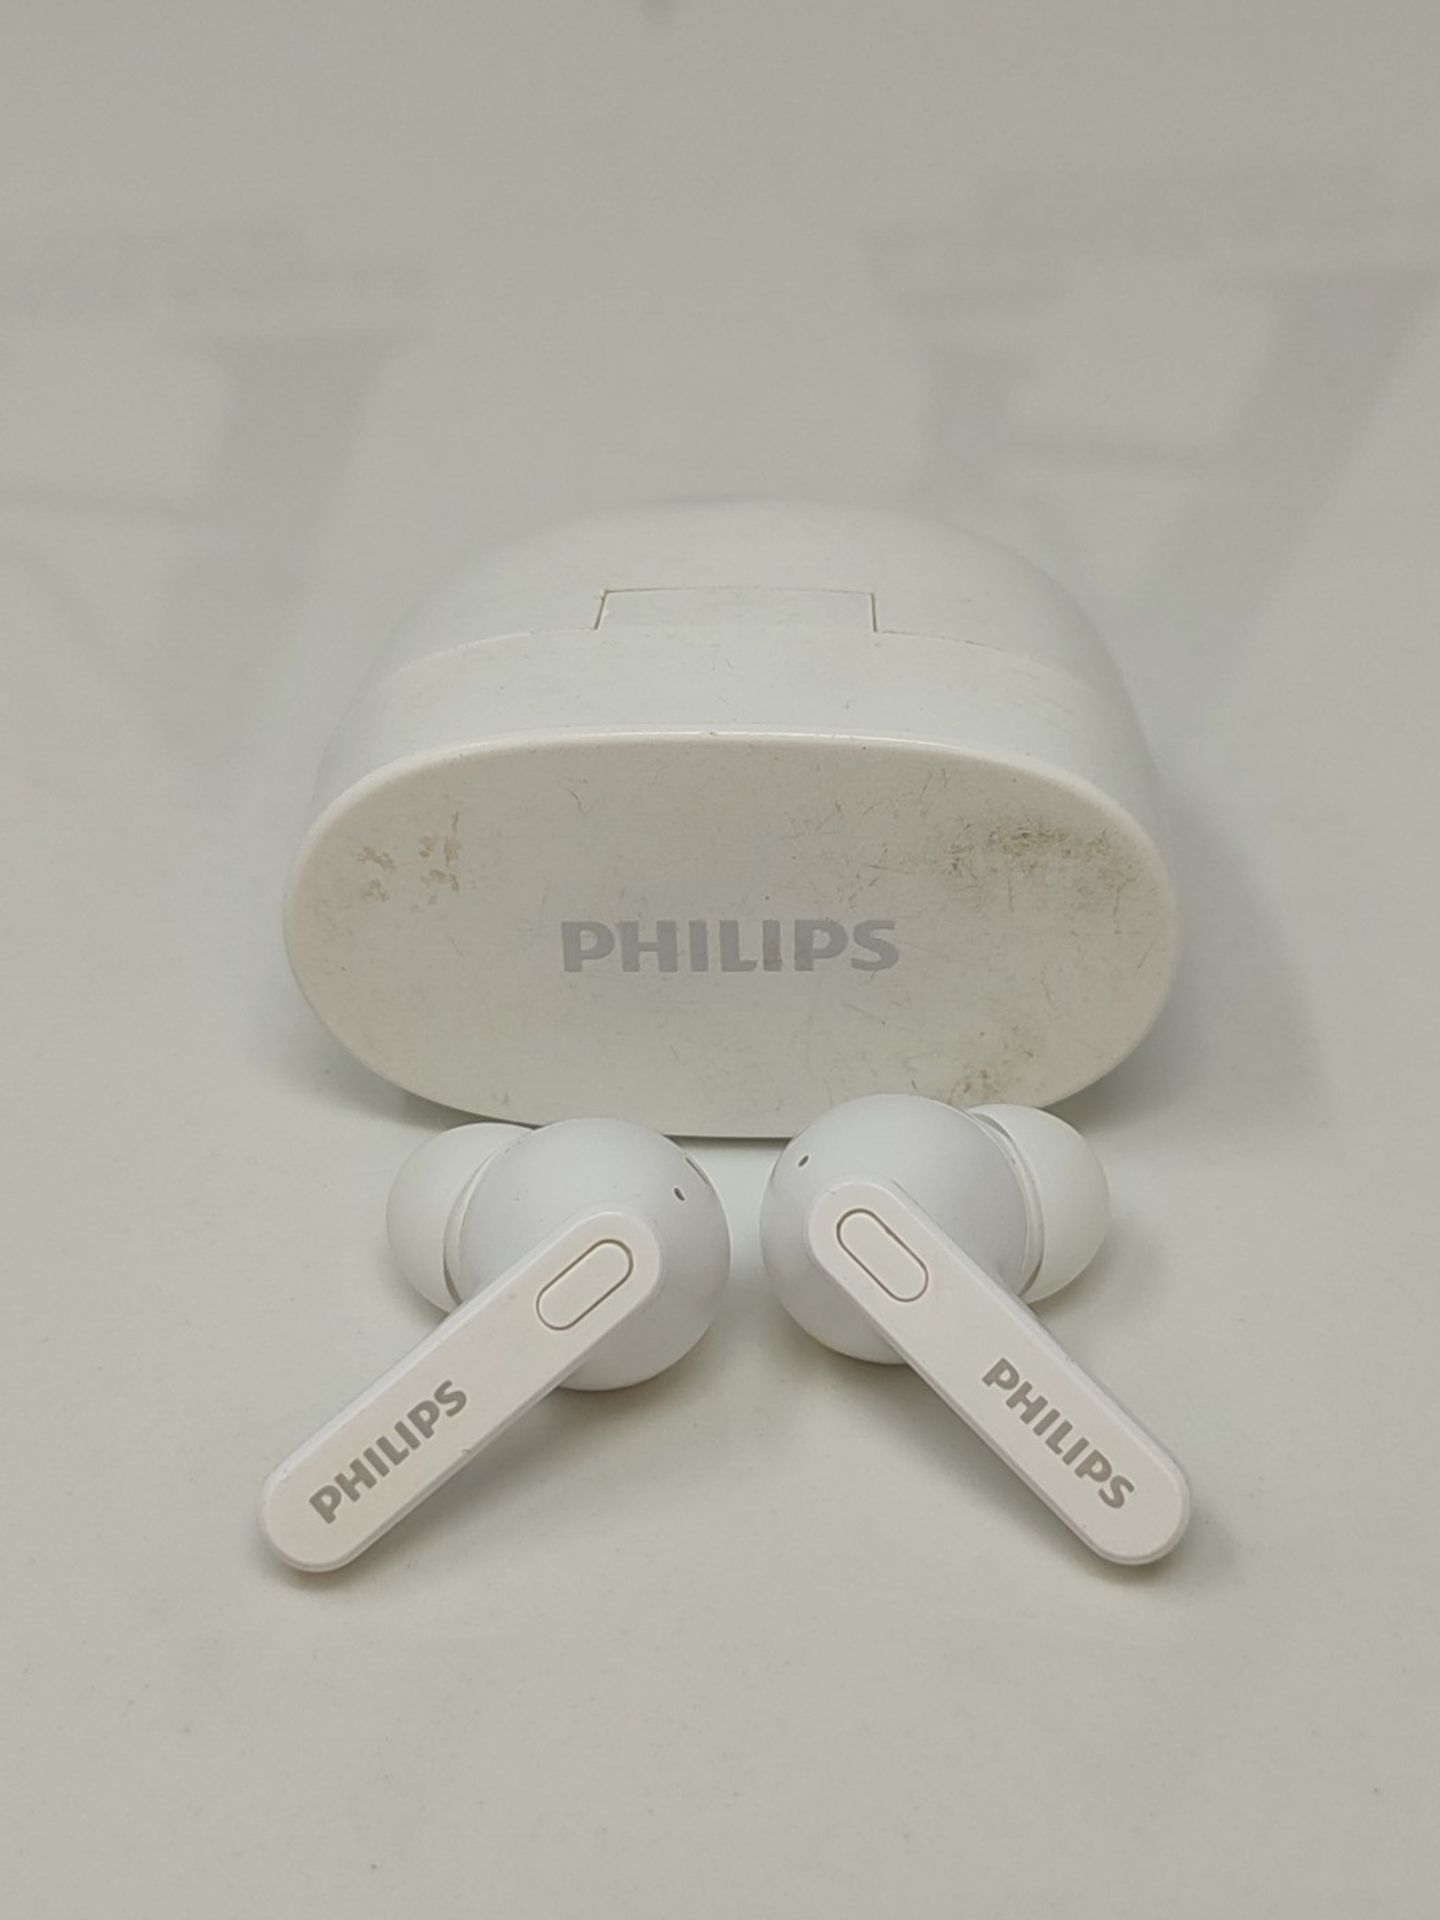 PHILIPS Bluetooth Earphones with Wireless Microphone, Sweat-Resistant, 18 Hours of Pla - Image 3 of 6